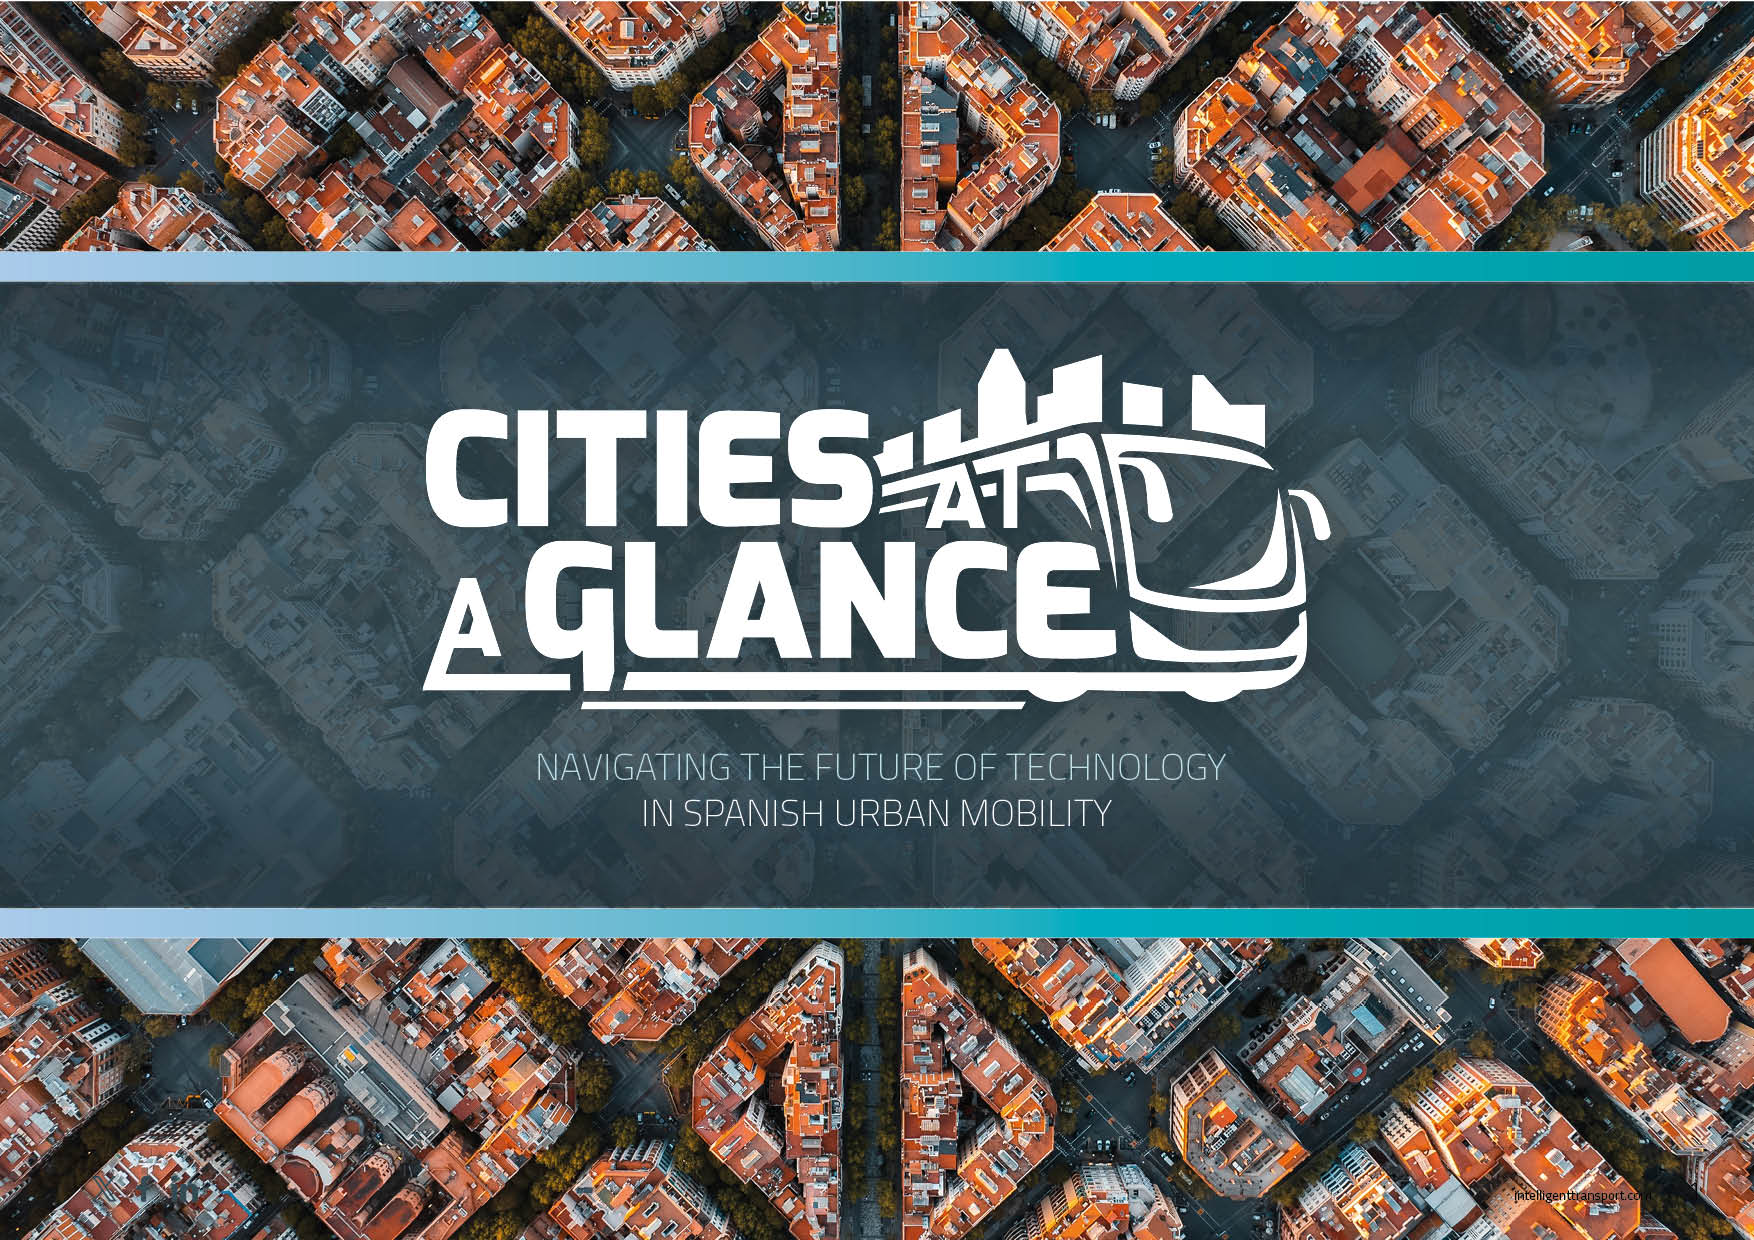 Cities at a Glance: Navigating the future of technology in Spanish urban mobility